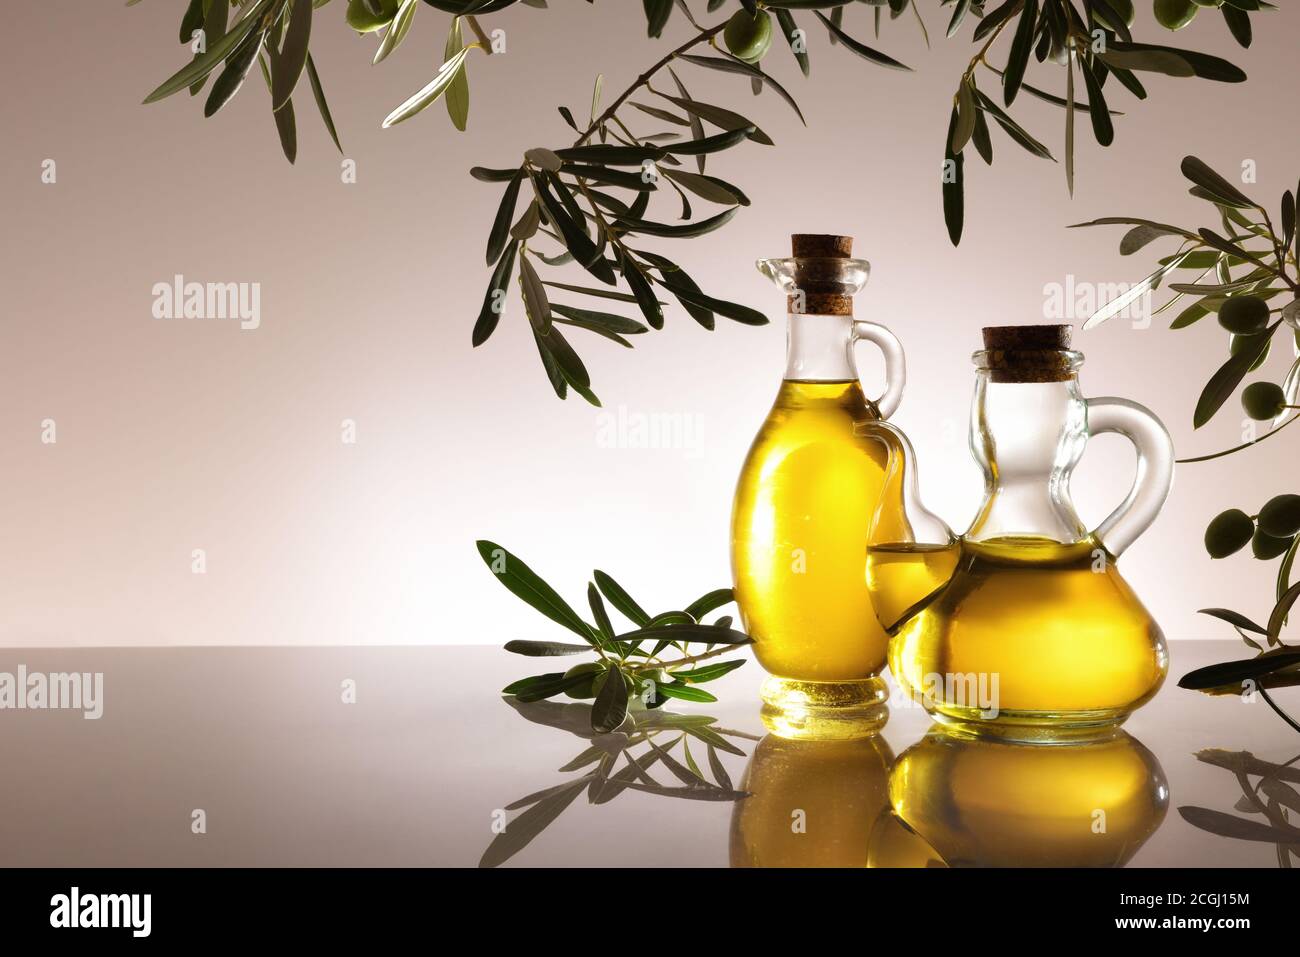 Glass containers full with olive oil backlit on glass table and gray gradient isolated background with olive branches. Front view. Stock Photo